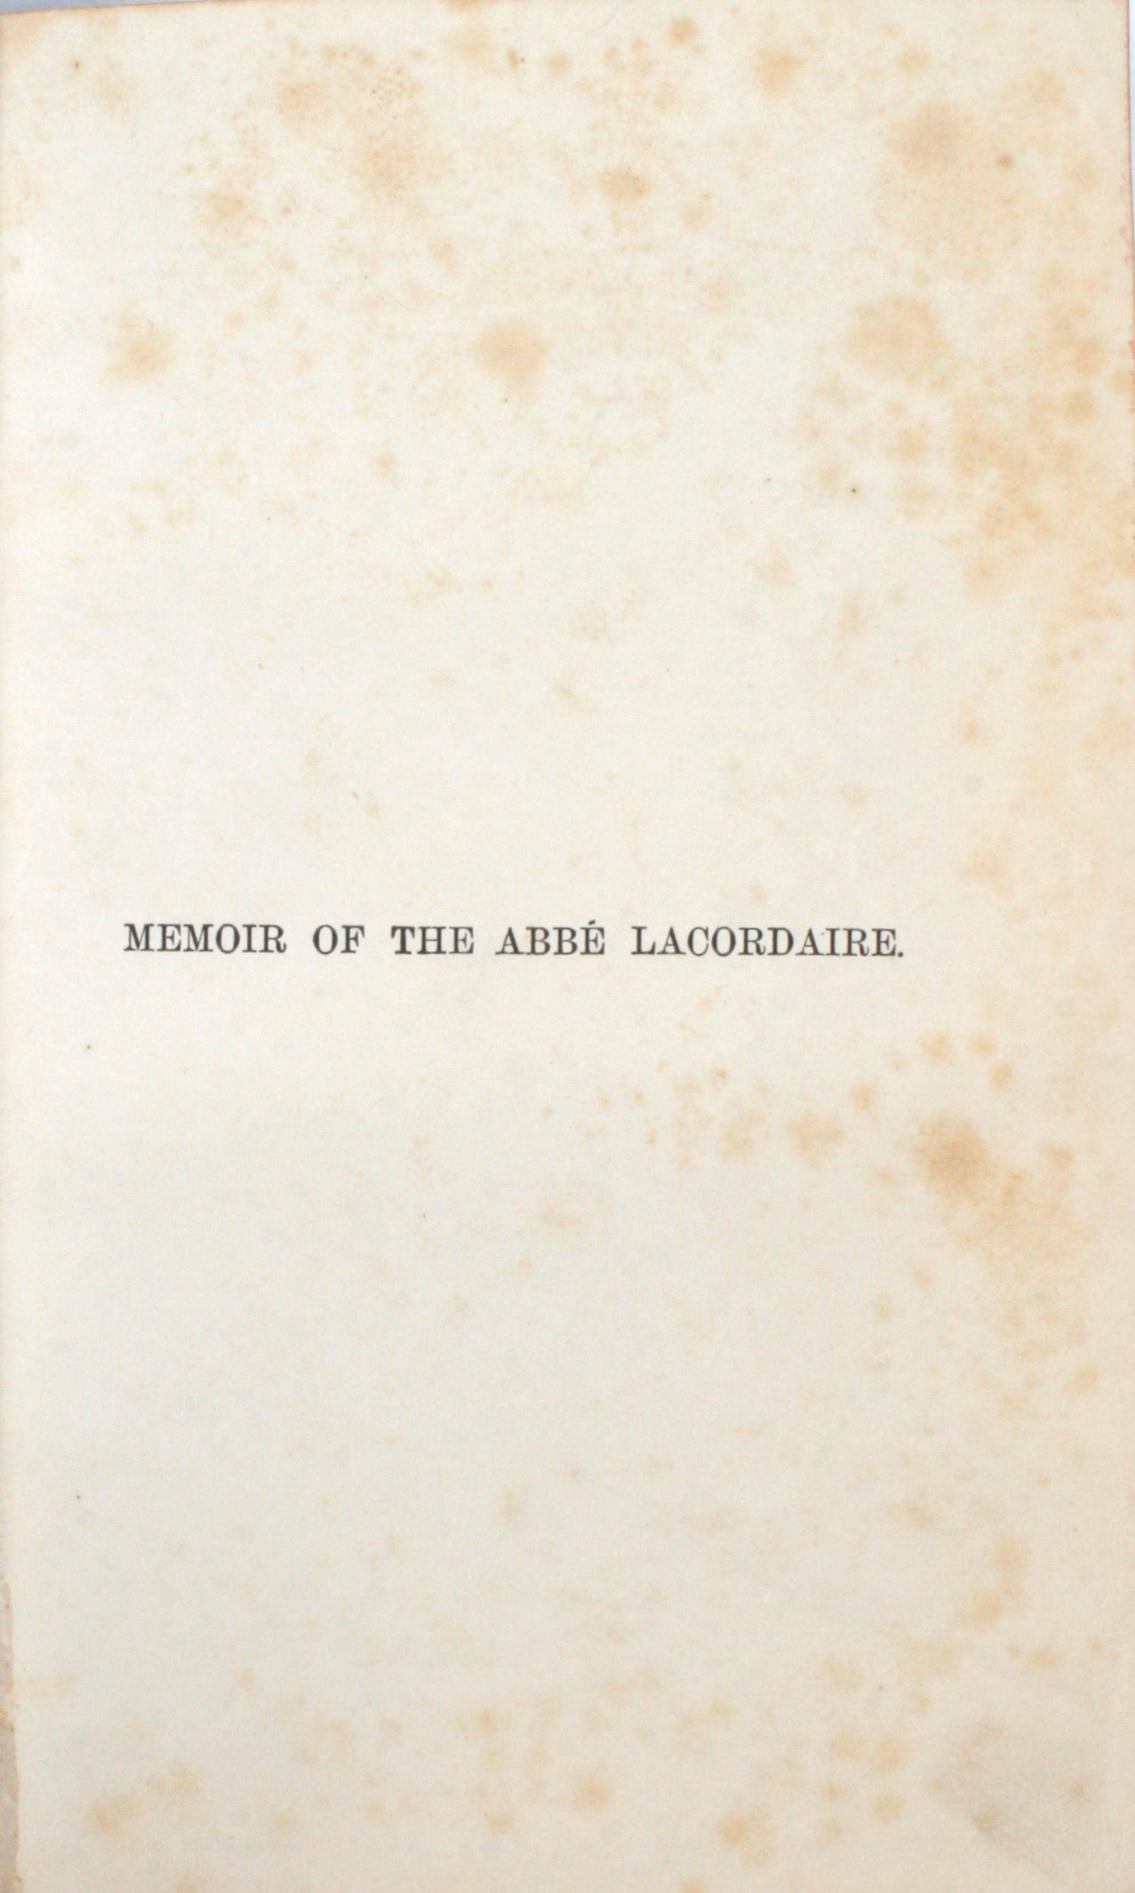 English Memoir of the Abbé Lacordaire by the Count De Montalembert, First Edition For Sale